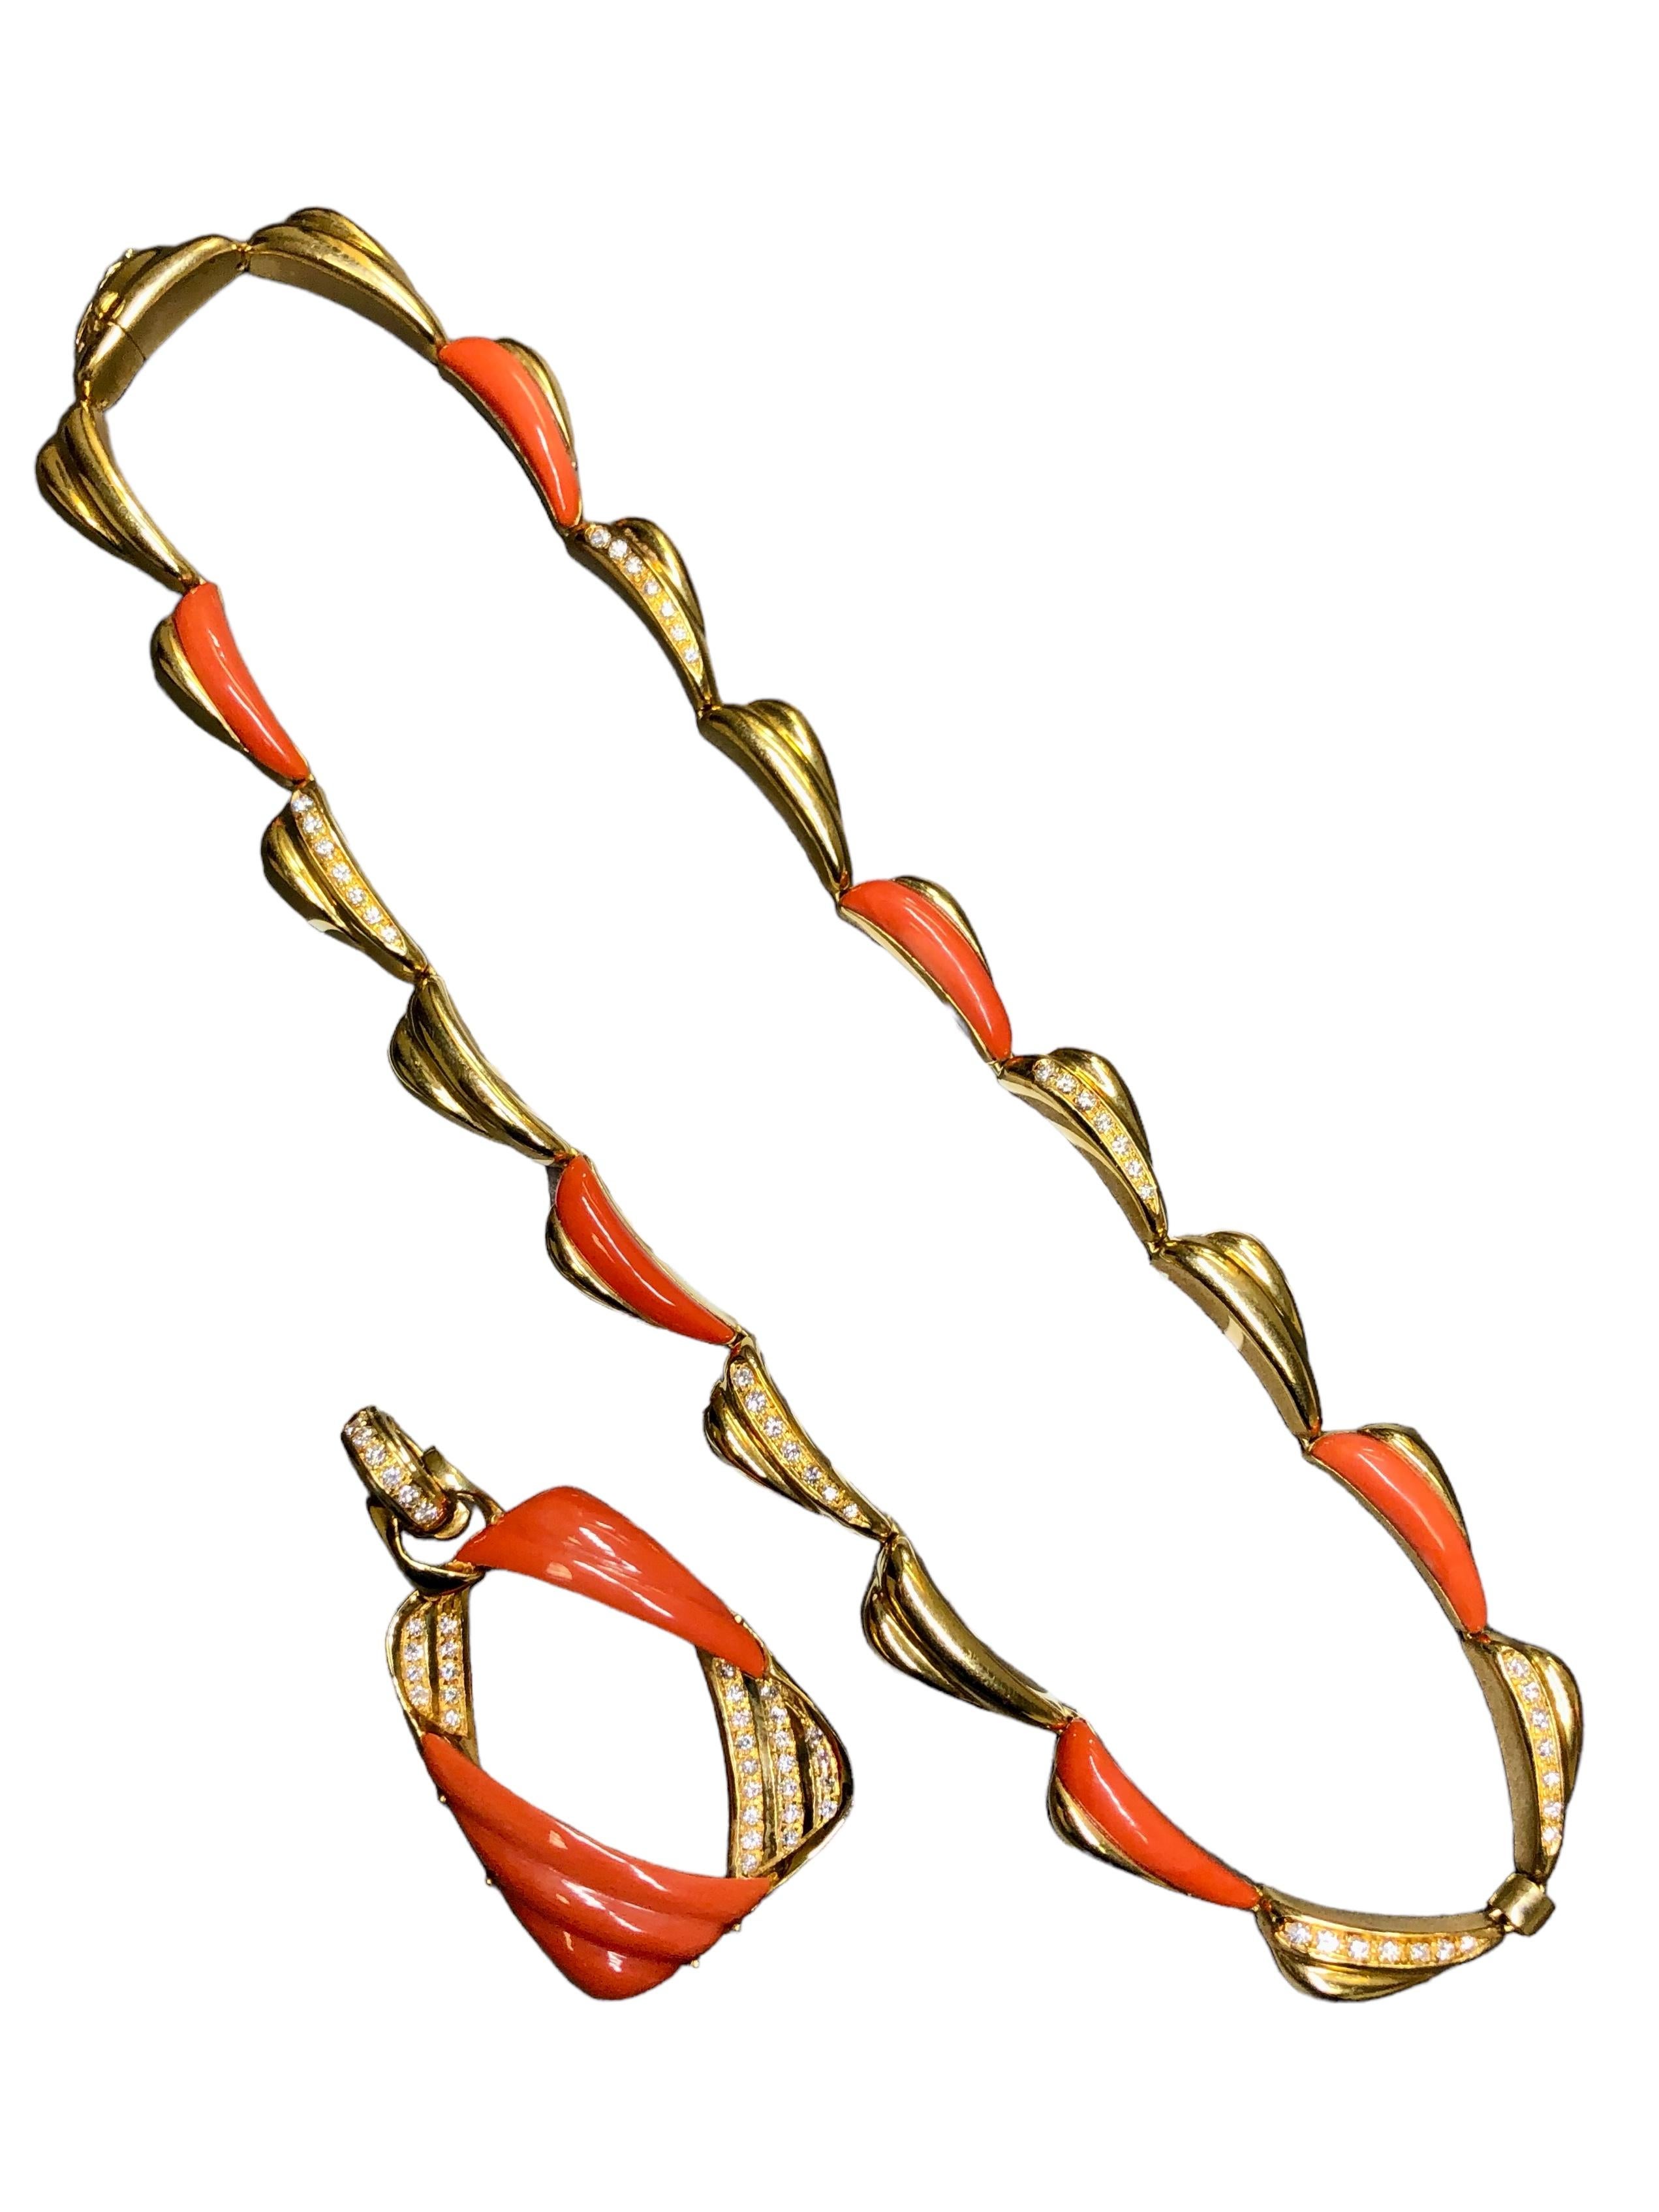 
A beautiful Italian made necklace done in 18K yellow gold with perfectly matched carved coral inlaid throughout as well as approximately 1.42cttw in F-G color Vs1-2 clarity round diamonds. The pendant does separate from the necklace so that you can